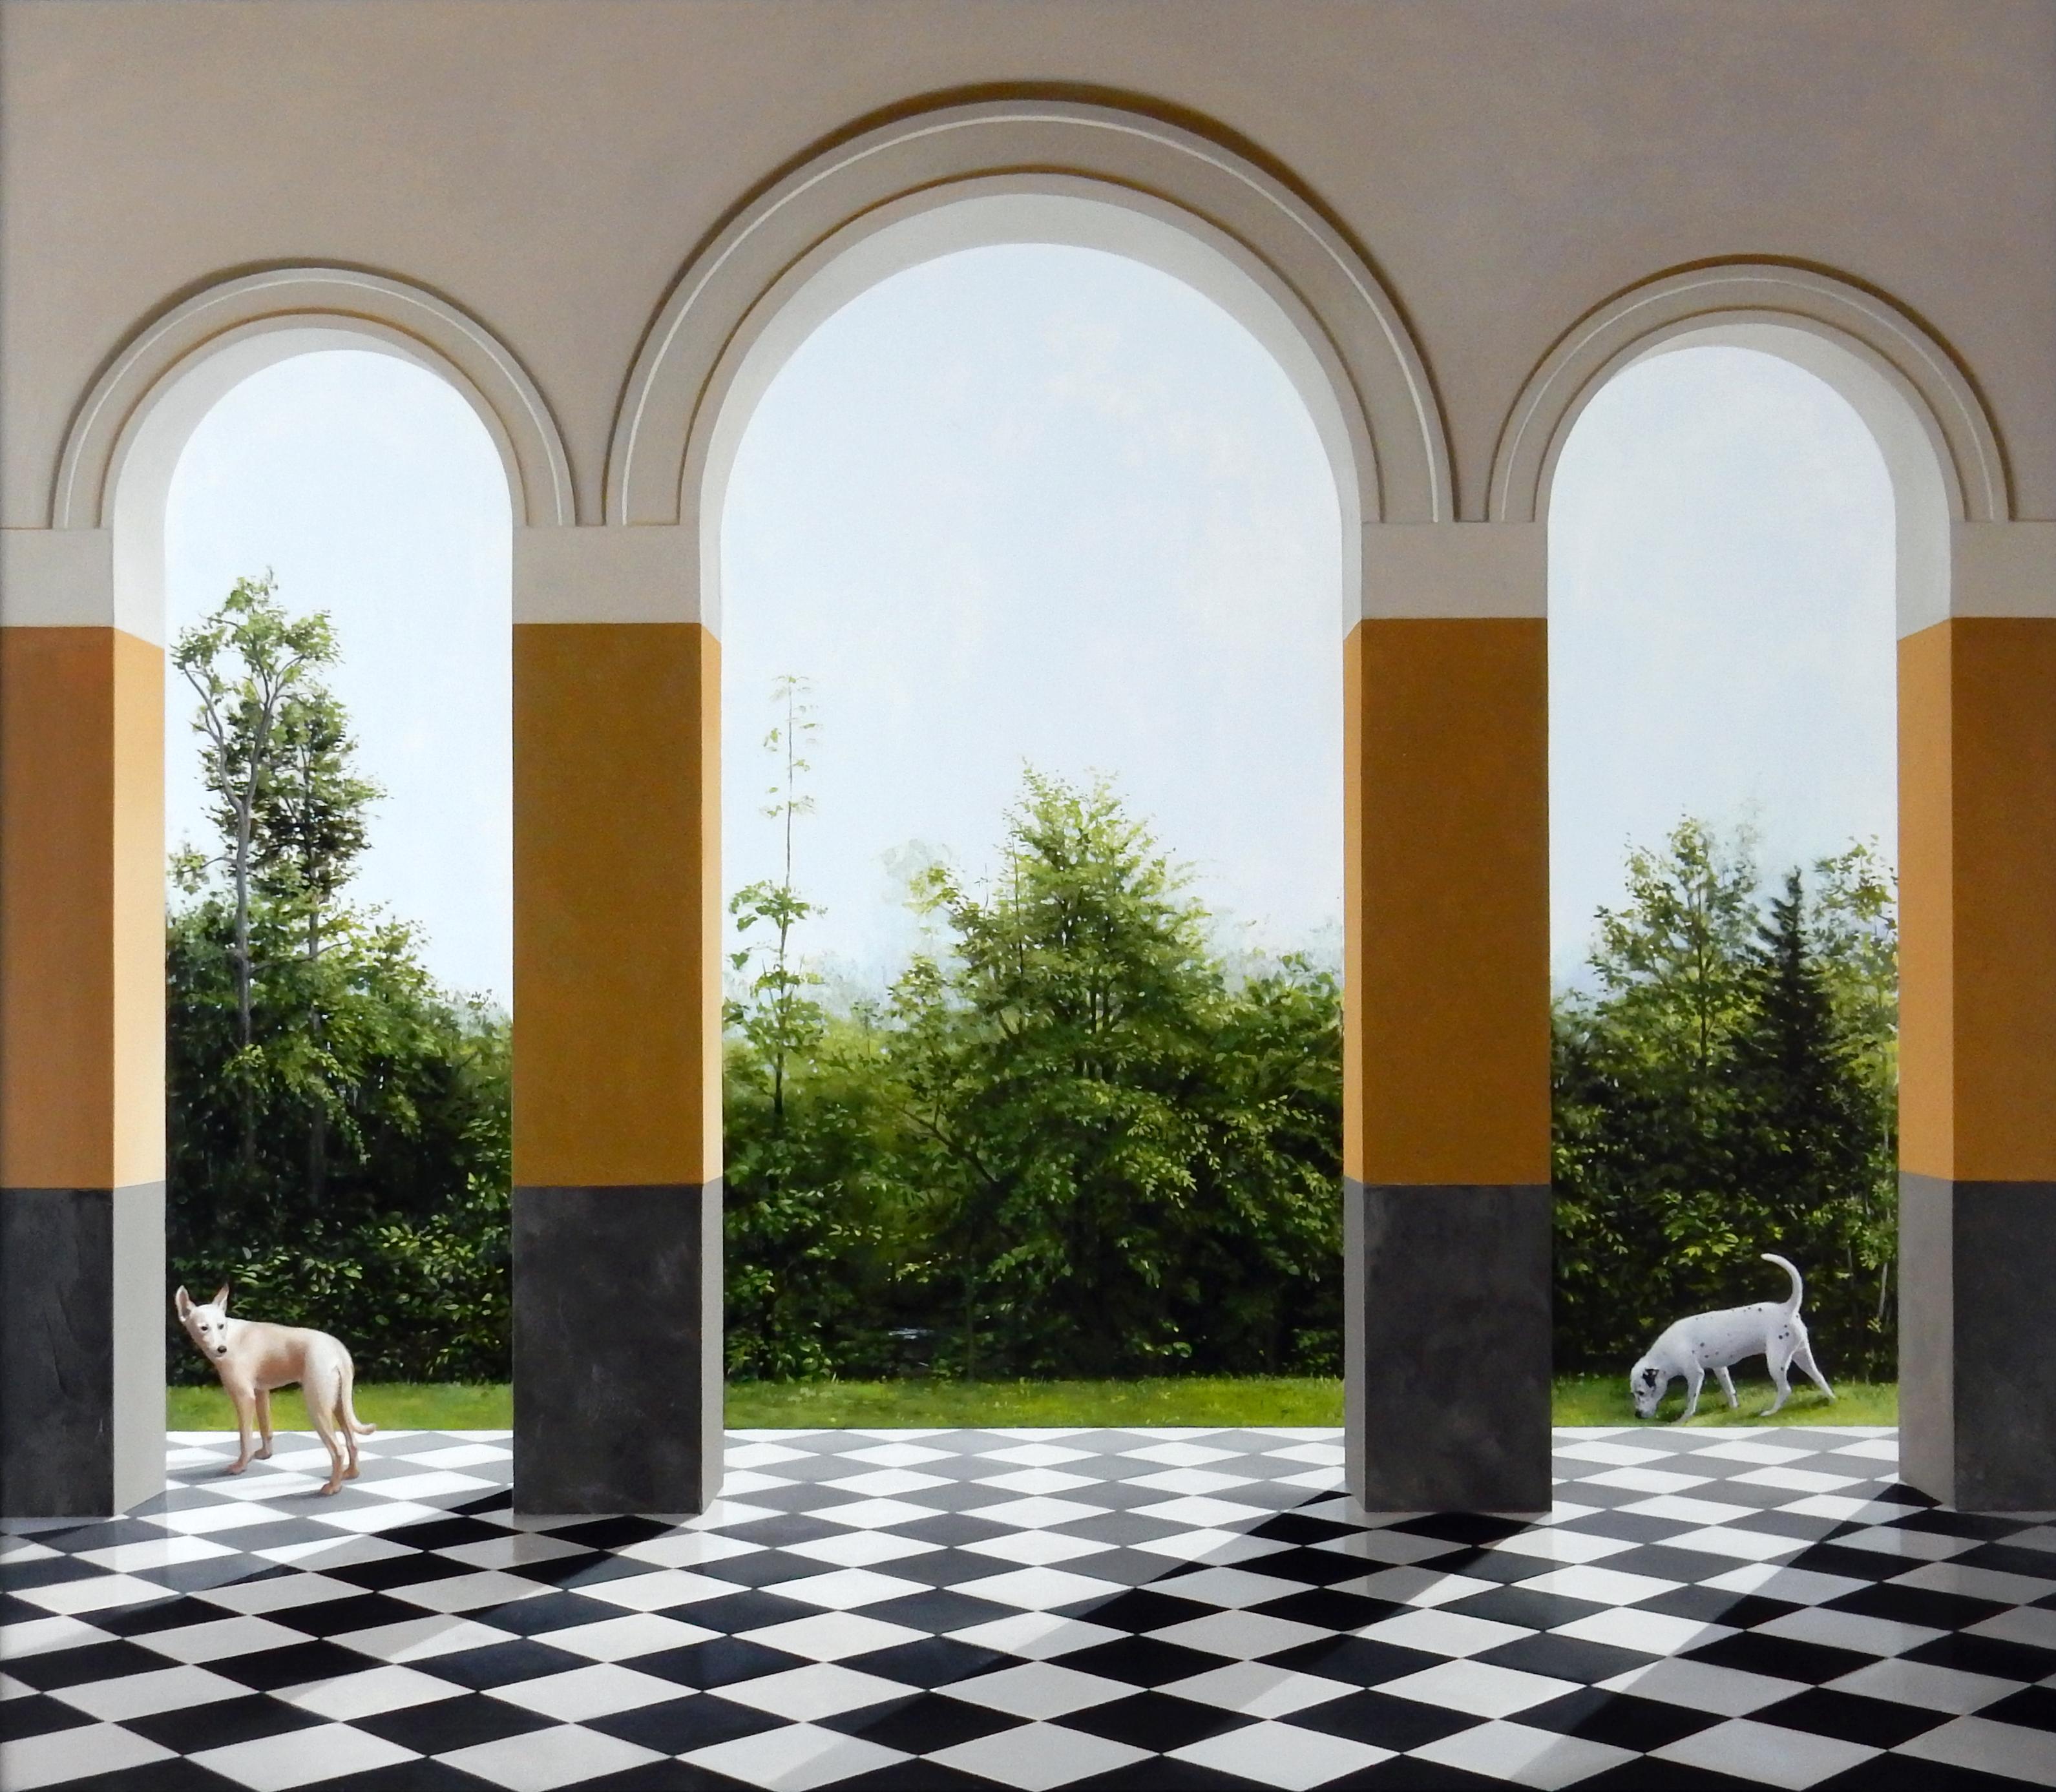 Carol Pylant Landscape Painting – Before the End - Architectural Arches with Wooded Landscape & Dogs, Oil Painting